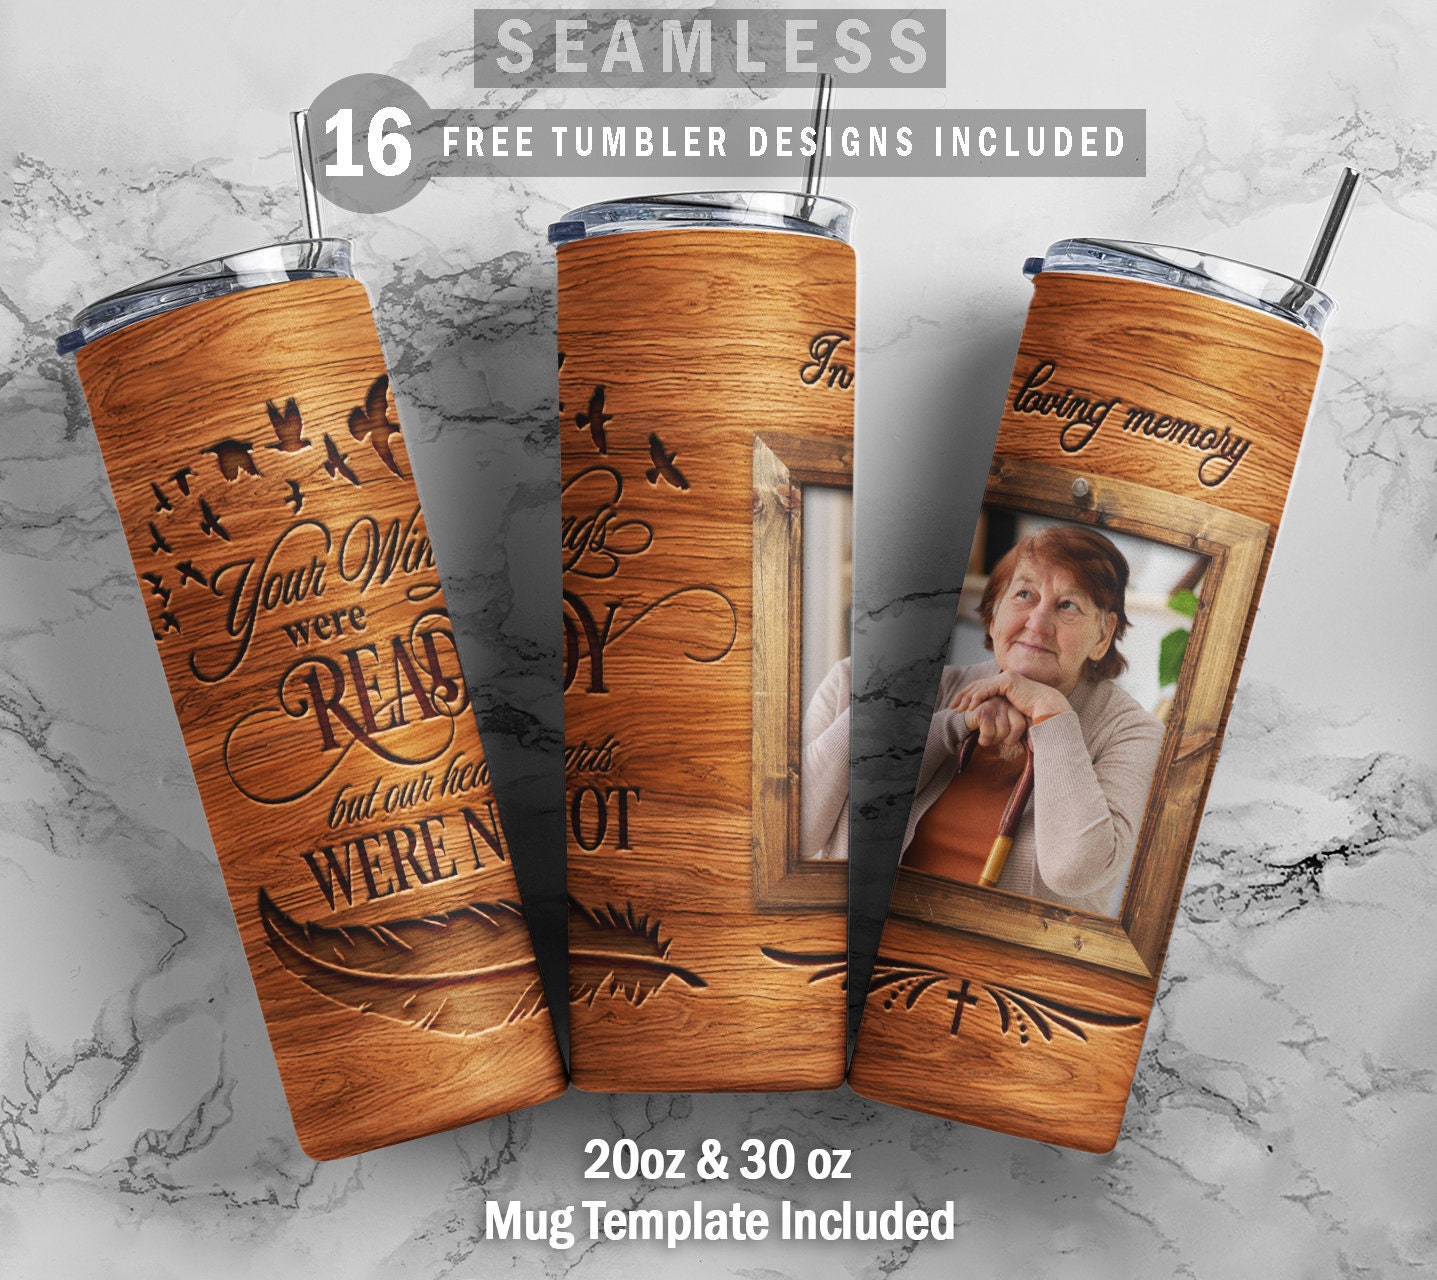 30 oz Skinny Tumbler Sublimation Design Template memorial quote with Photo  Spots Straight Digital Download PNG tumblers Tamara